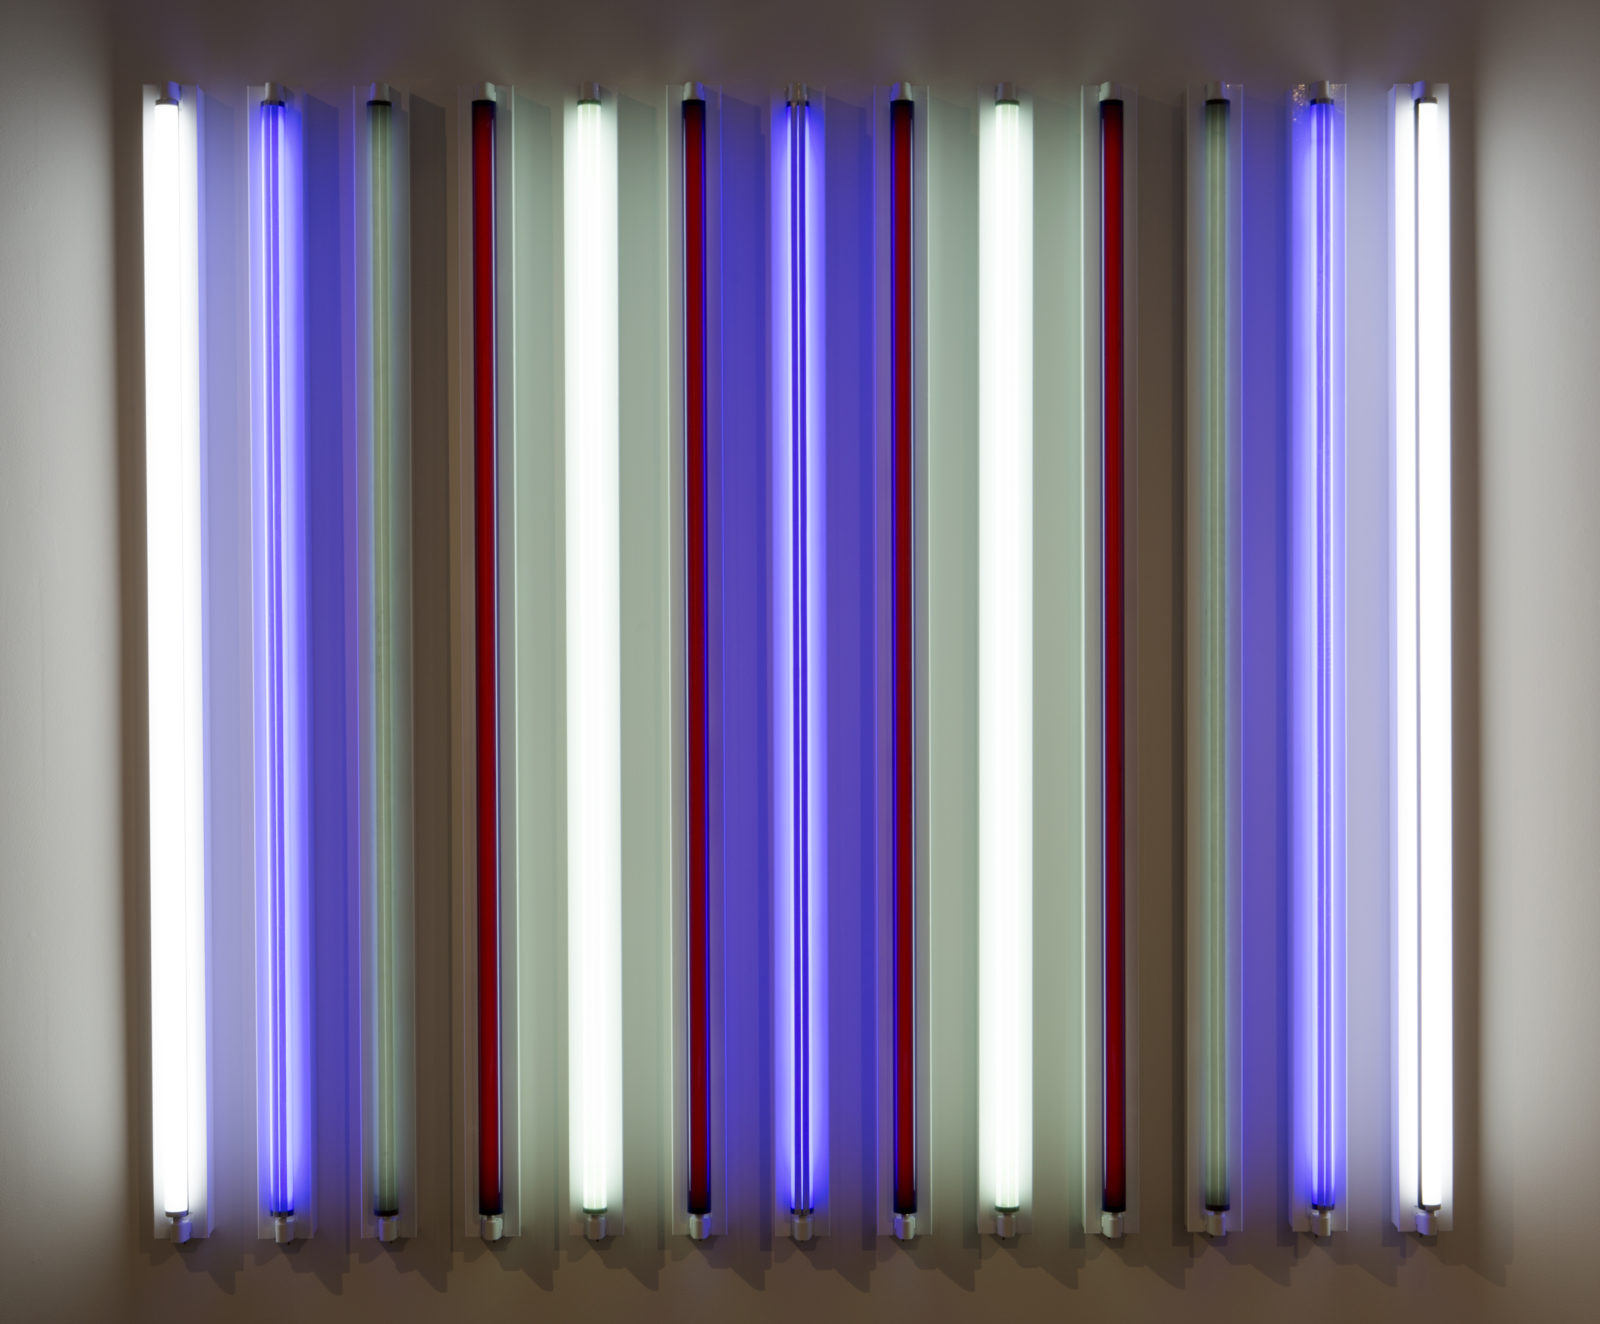 Here, the 13 evenly spaced tubes emit 6 different colors, with 4 on/off, user-controlled configurations. The custom-mixed colored gels are named after natural flora, including jade, violet, orange and avocado.